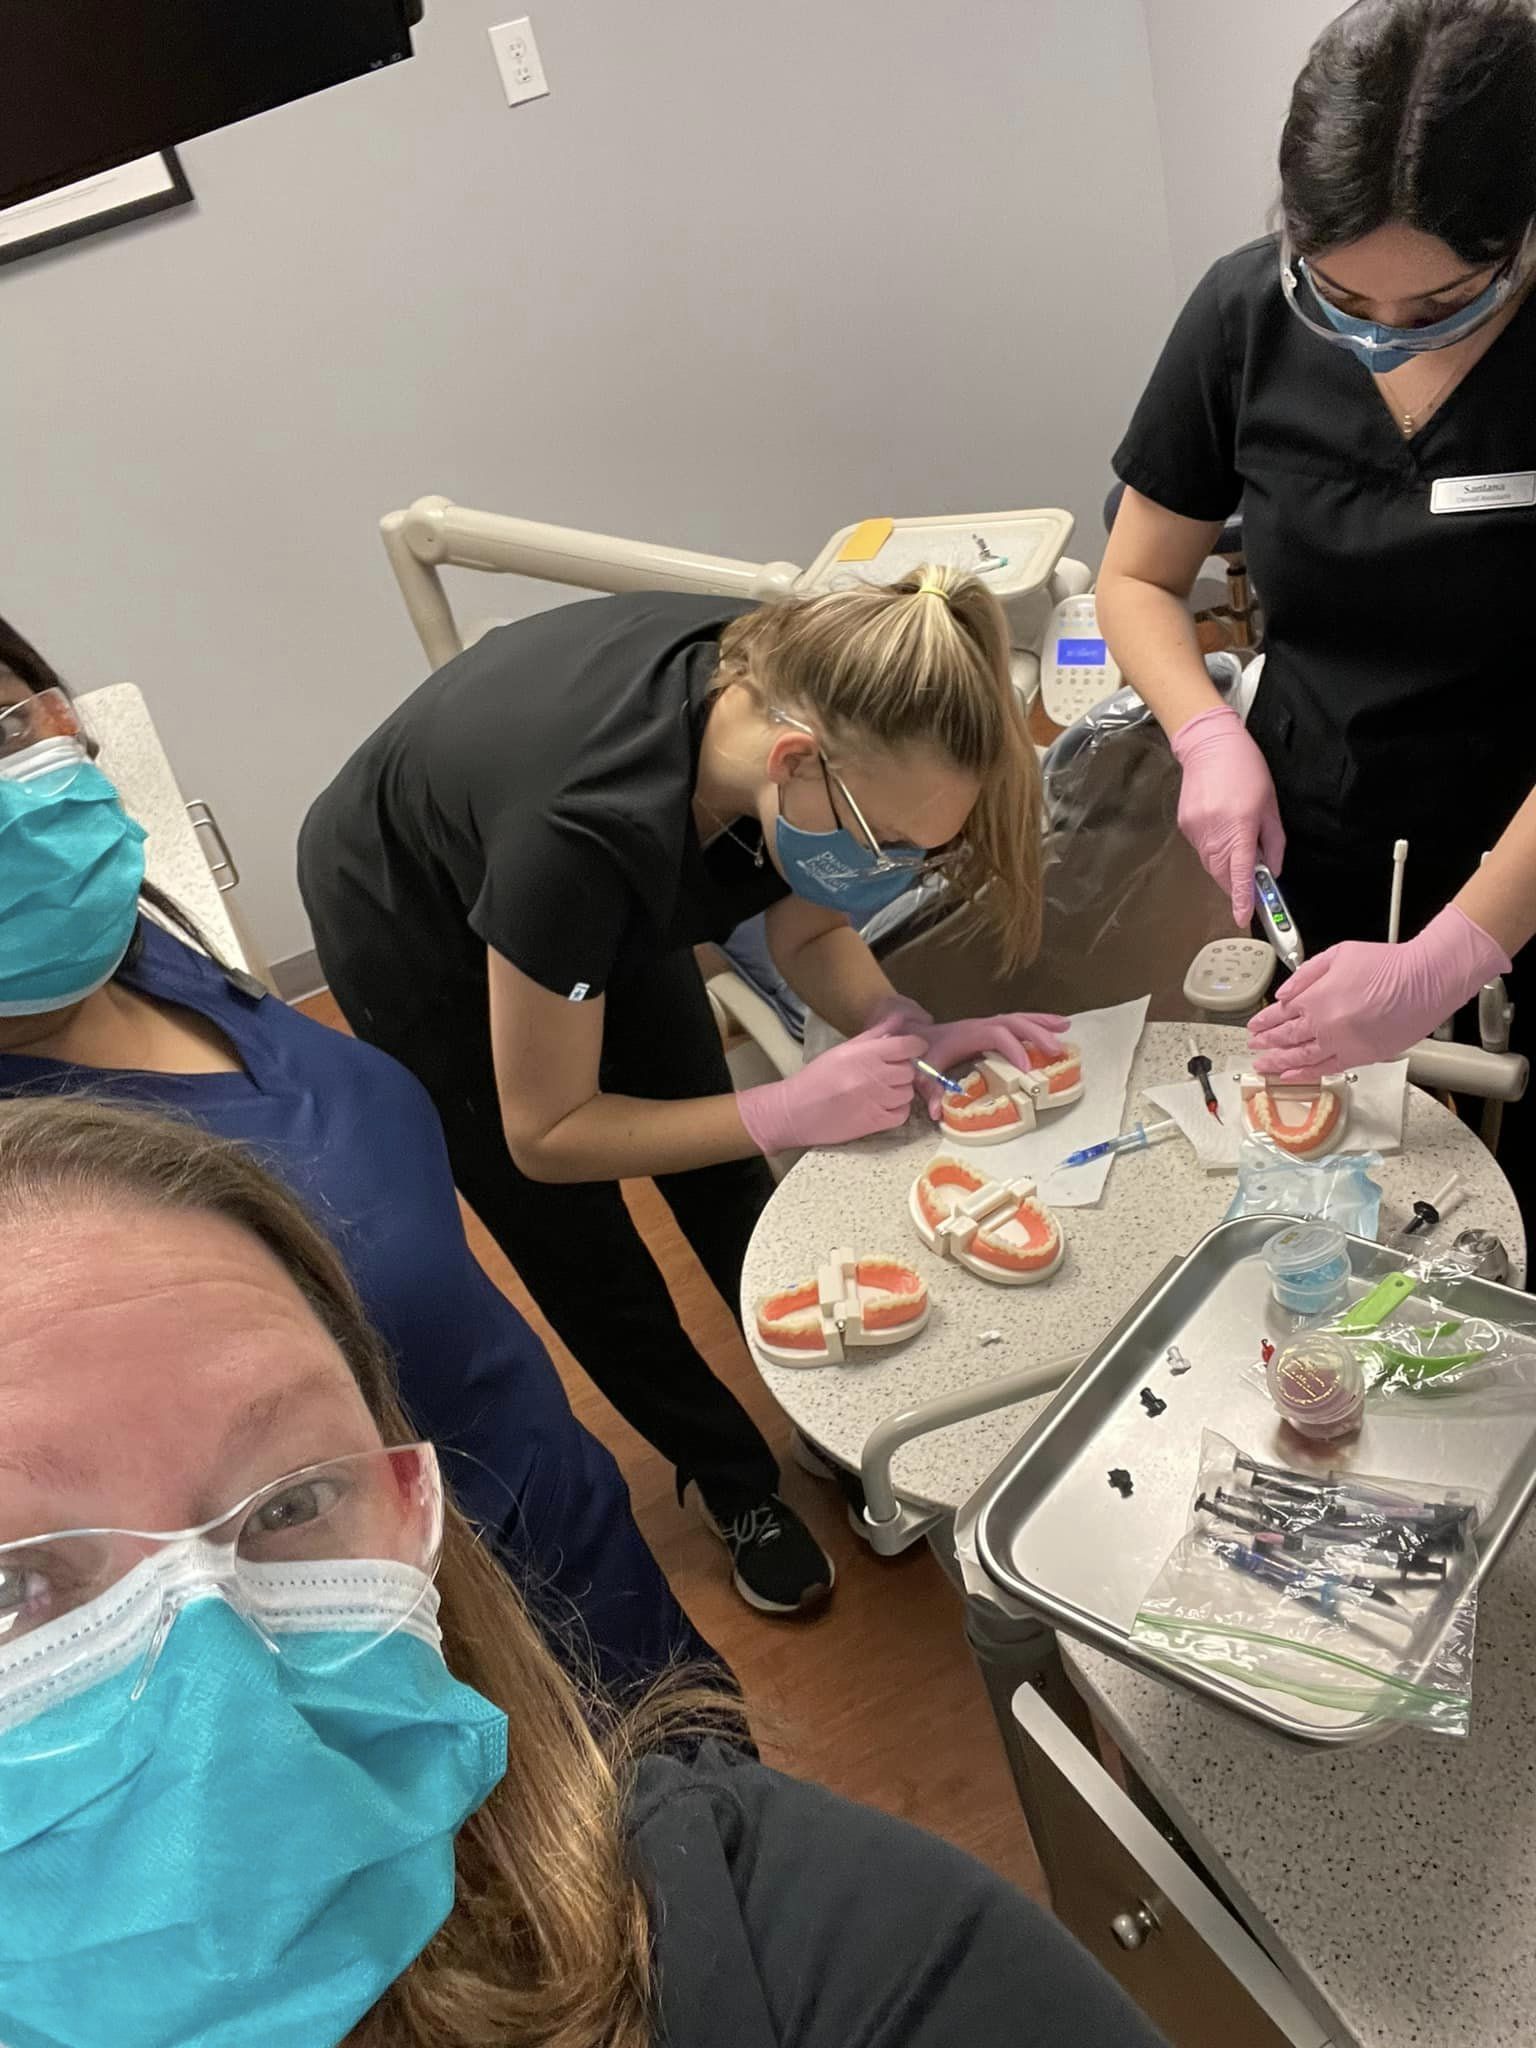 Dental assisting students on their first clinical day.